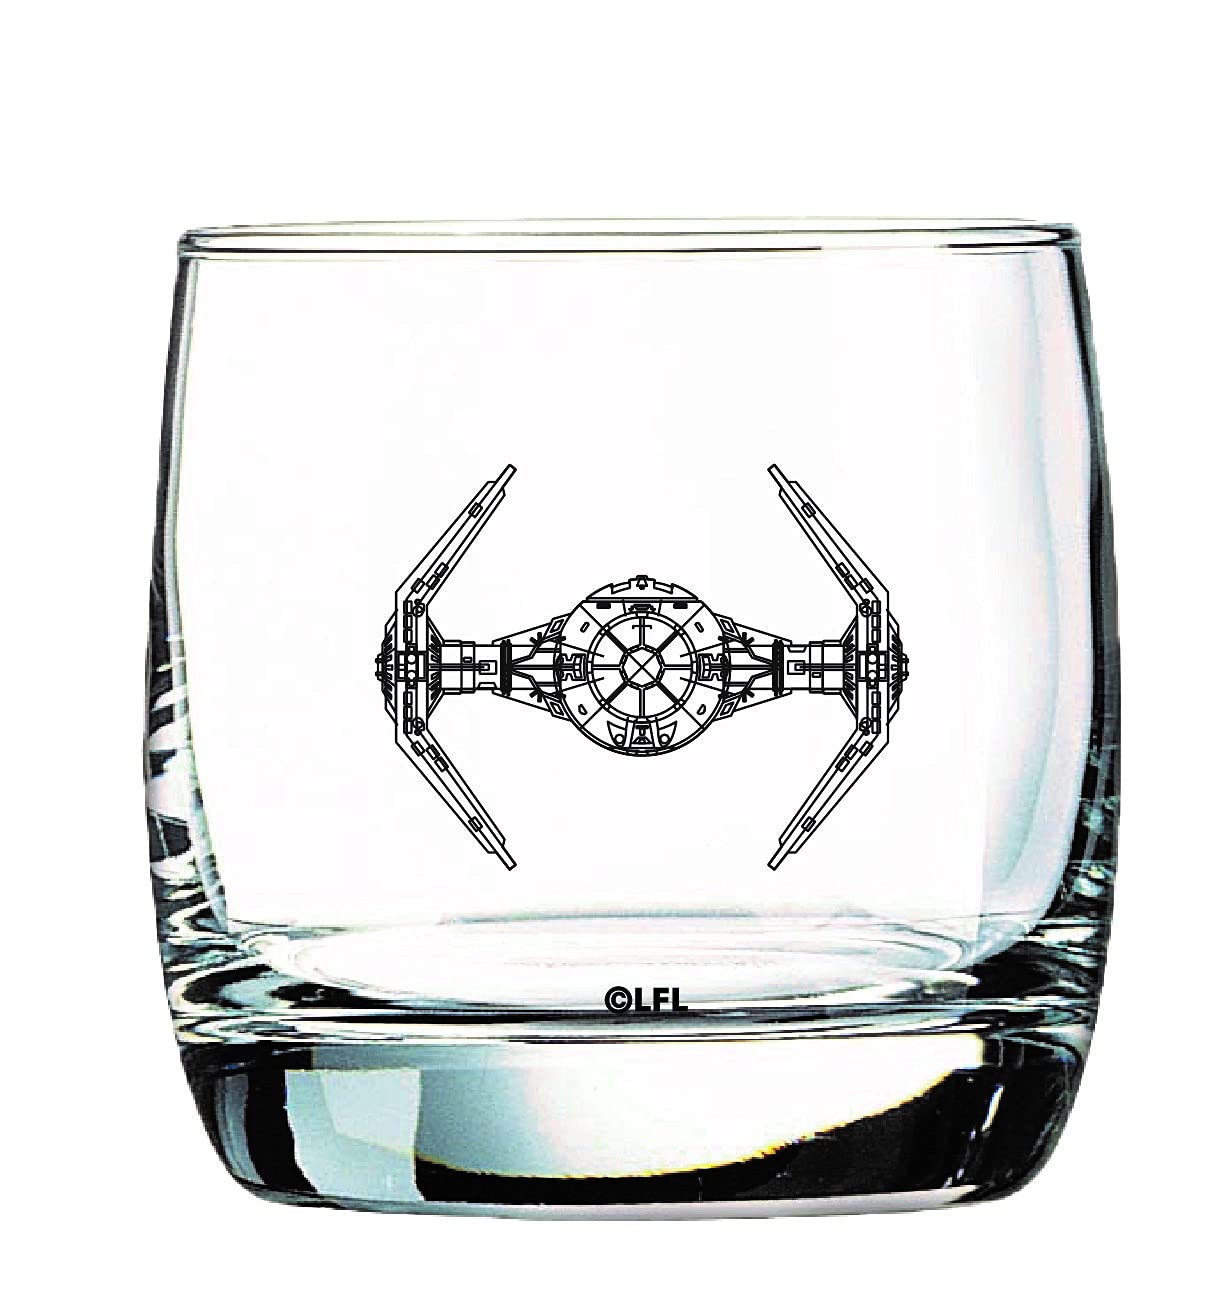 Star Wars Glass Set - X-Wing & TIE Fighter - Collectible Gift Set of 2 Cocktail Glasses - 10 oz Capacity - Classic Design - Heavy Base